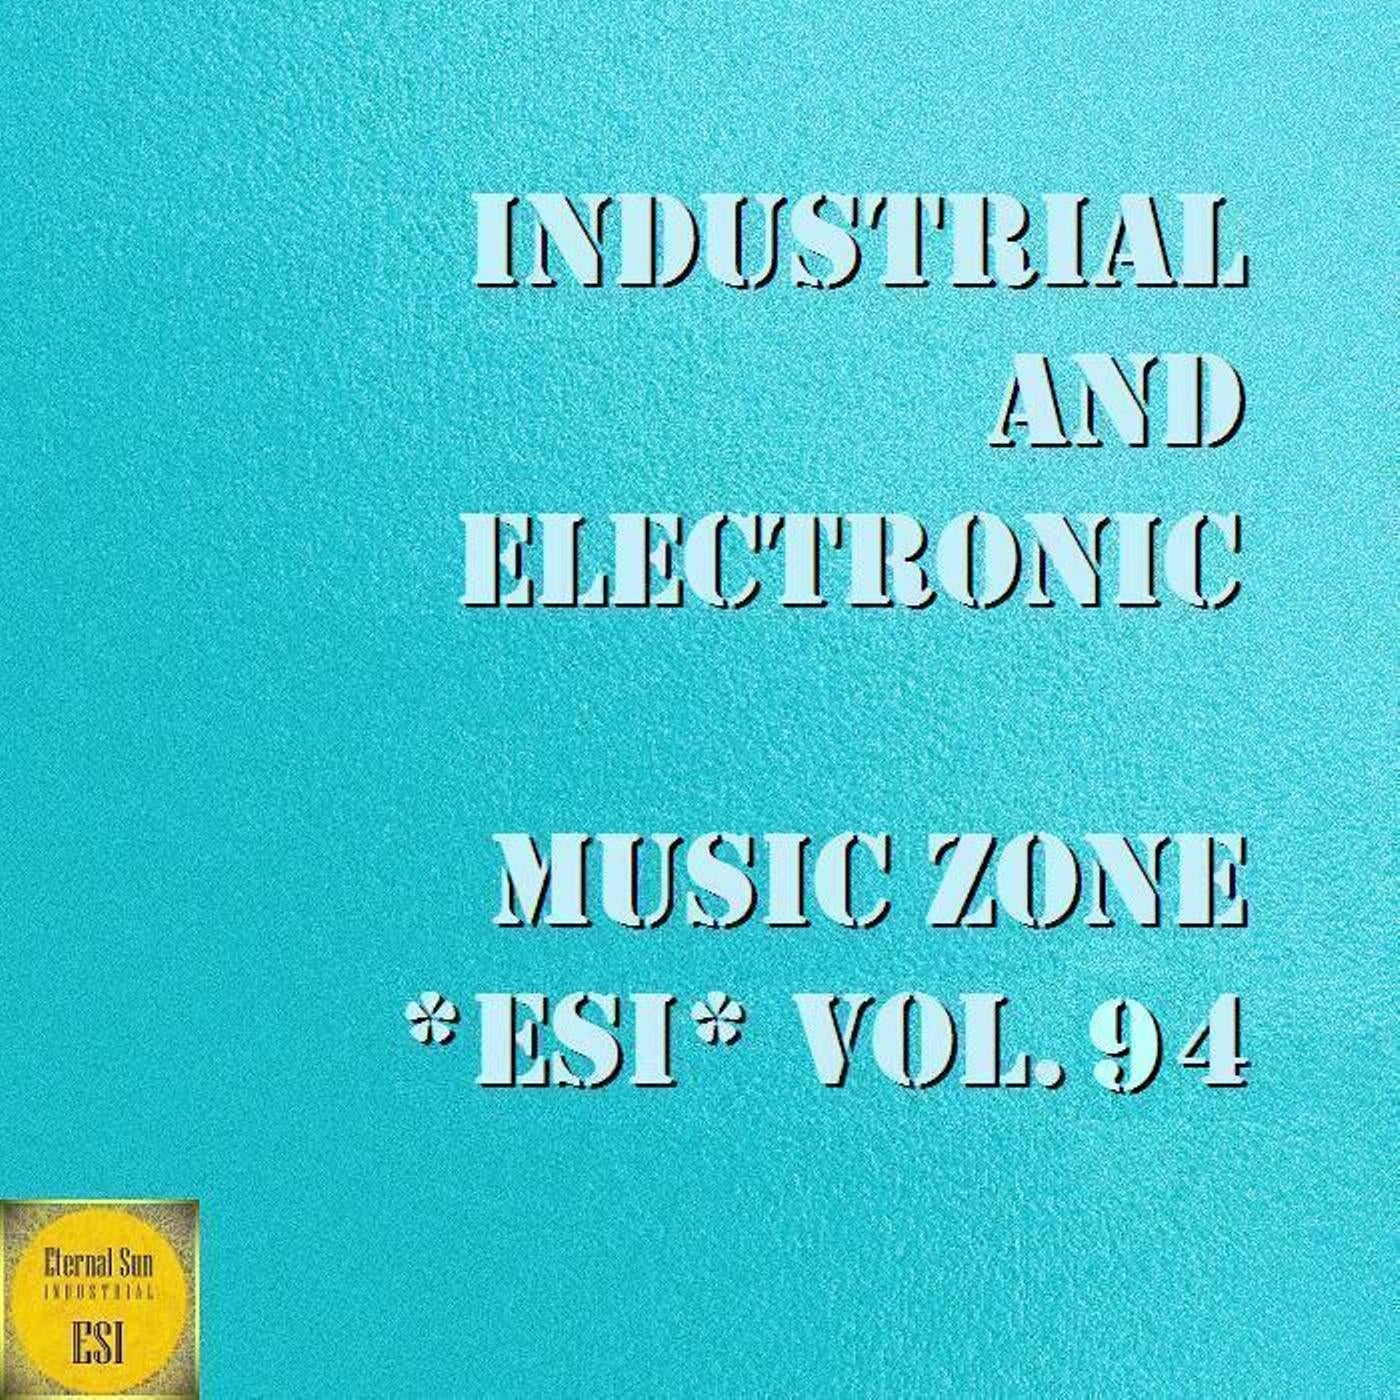 Industrial And Electronic - Music Zone ESI Vol. 94